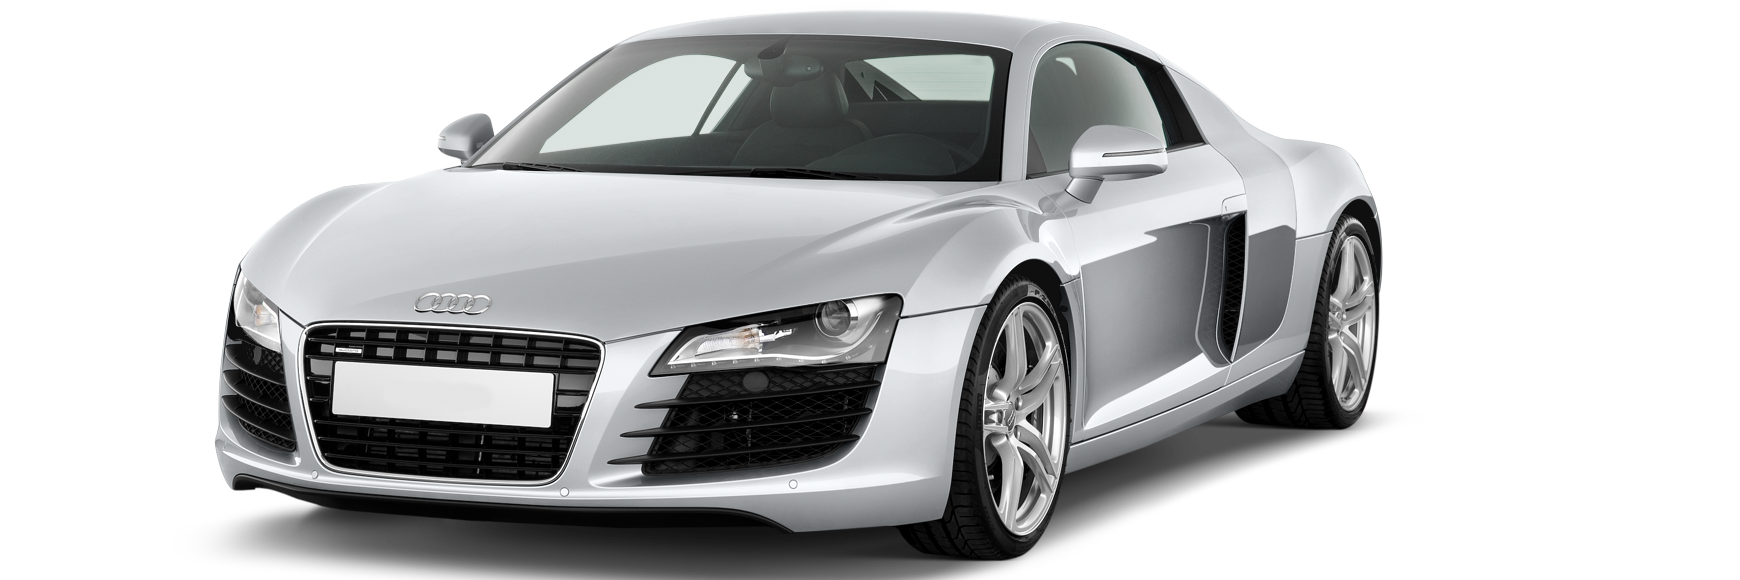 Free PNG HD Of Cars - 122609